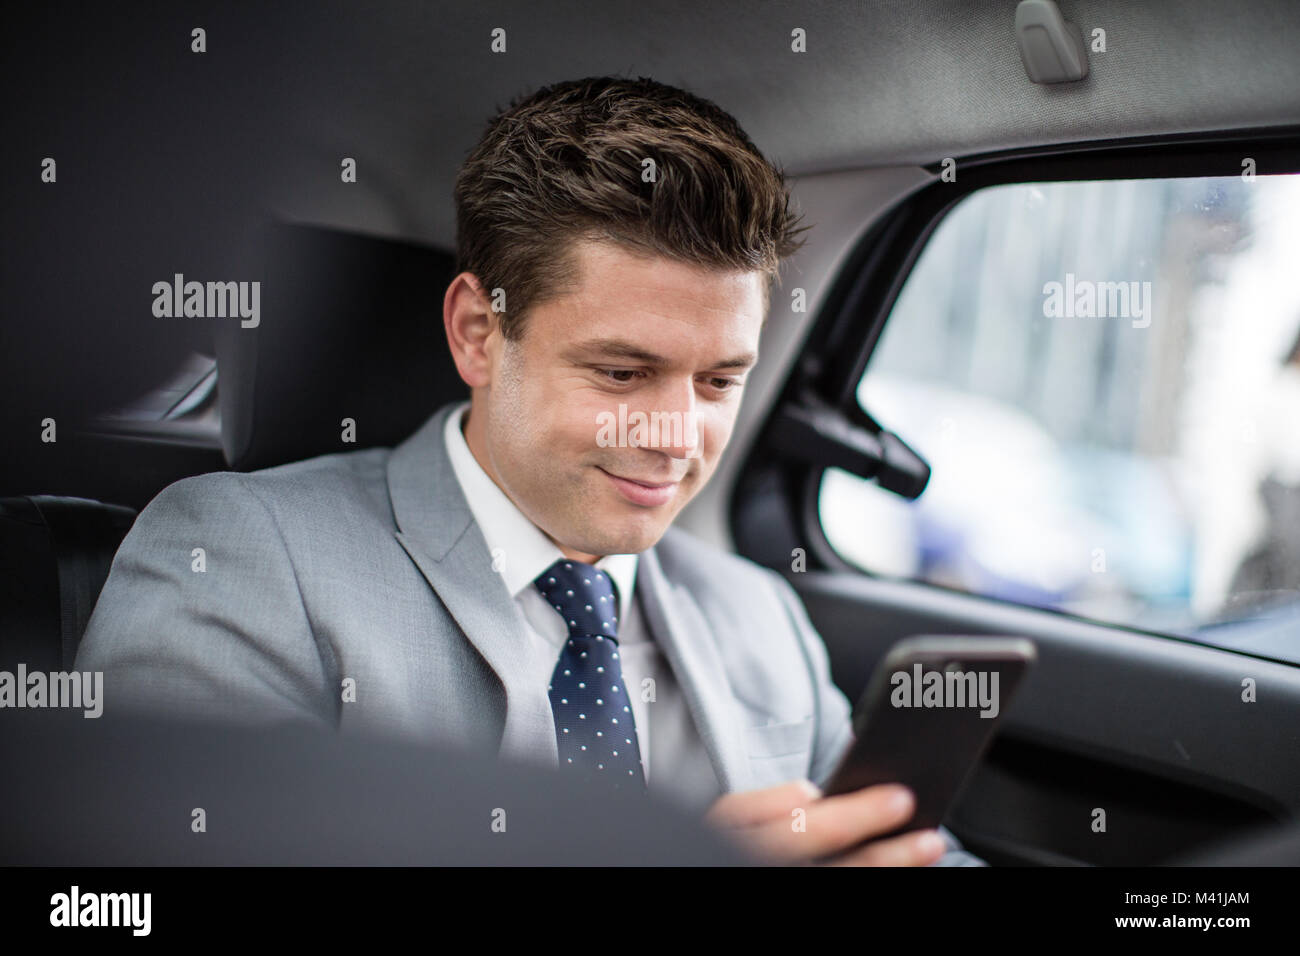 Businessman in taxi cab using smartphone Stock Photo